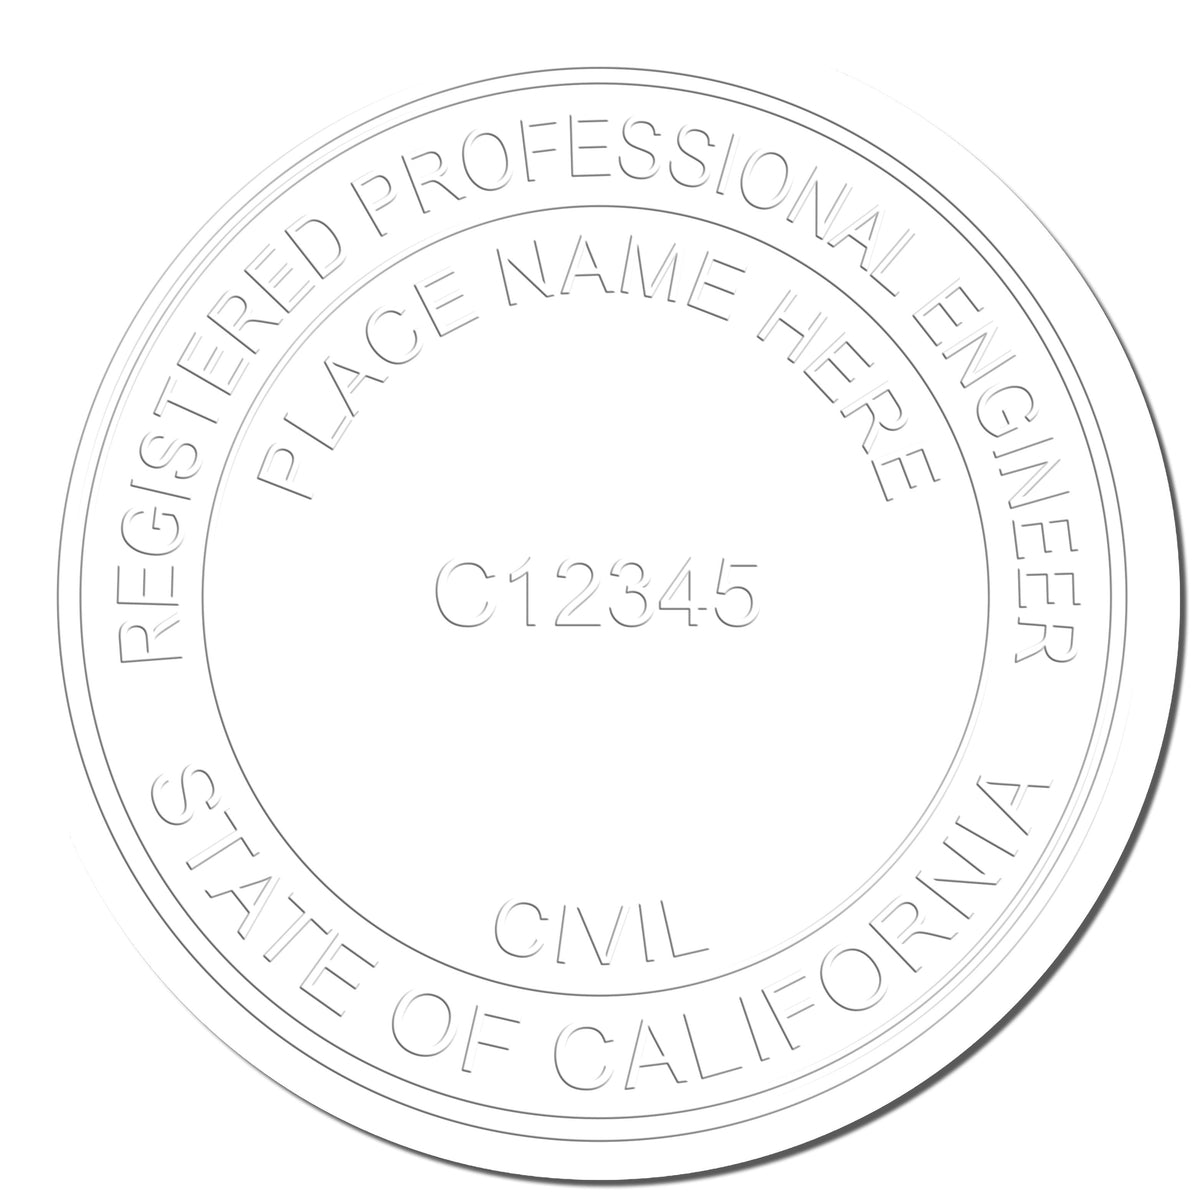 The Soft California Professional Engineer Seal stamp impression comes to life with a crisp, detailed photo on paper - showcasing true professional quality.